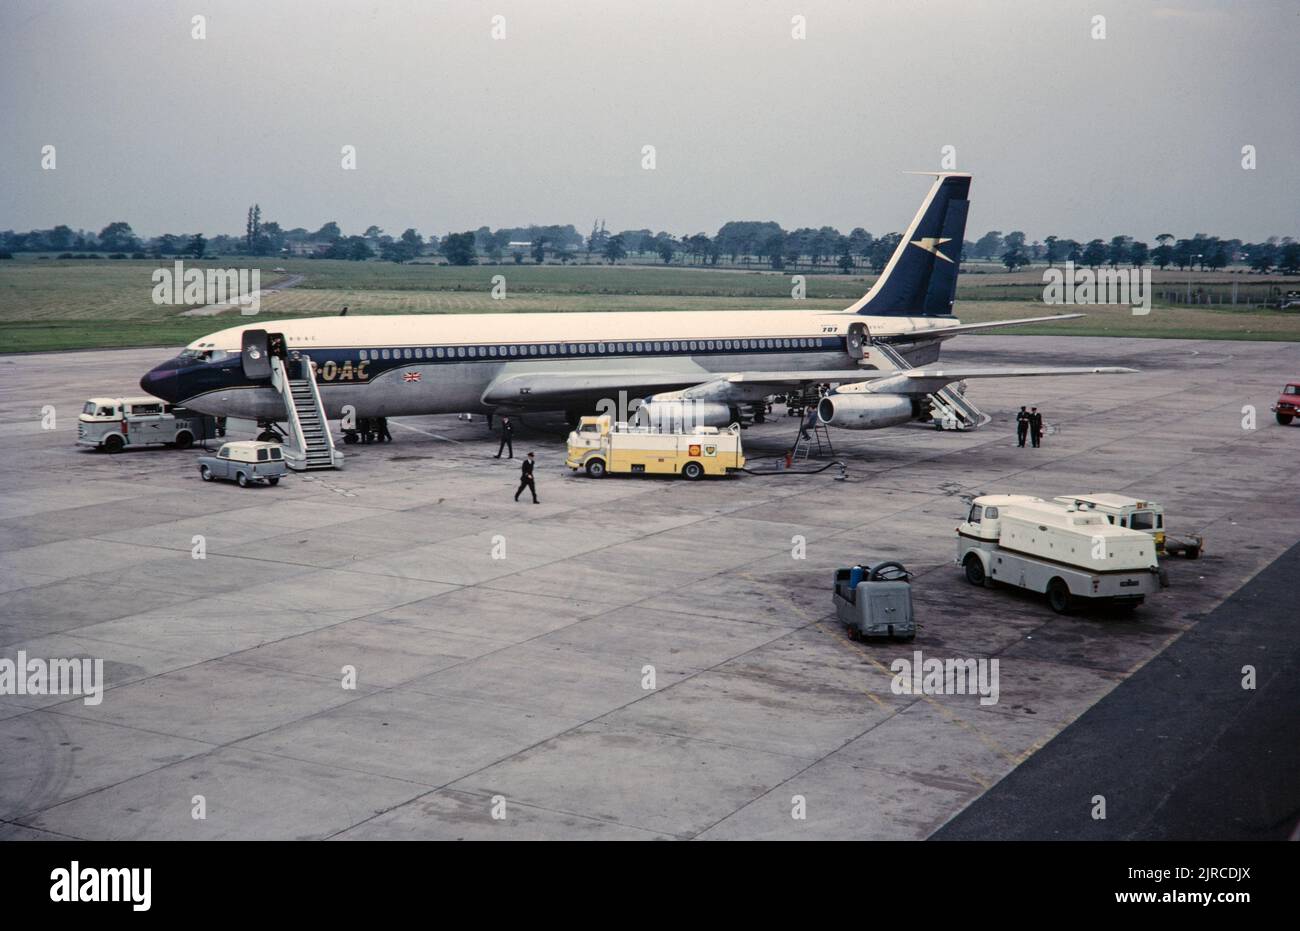 A BOAC Cunard Boeing 707 Jet Airliner, registration G-APFO at Manchester International Airport in England on 1st July 1965. Stock Photo